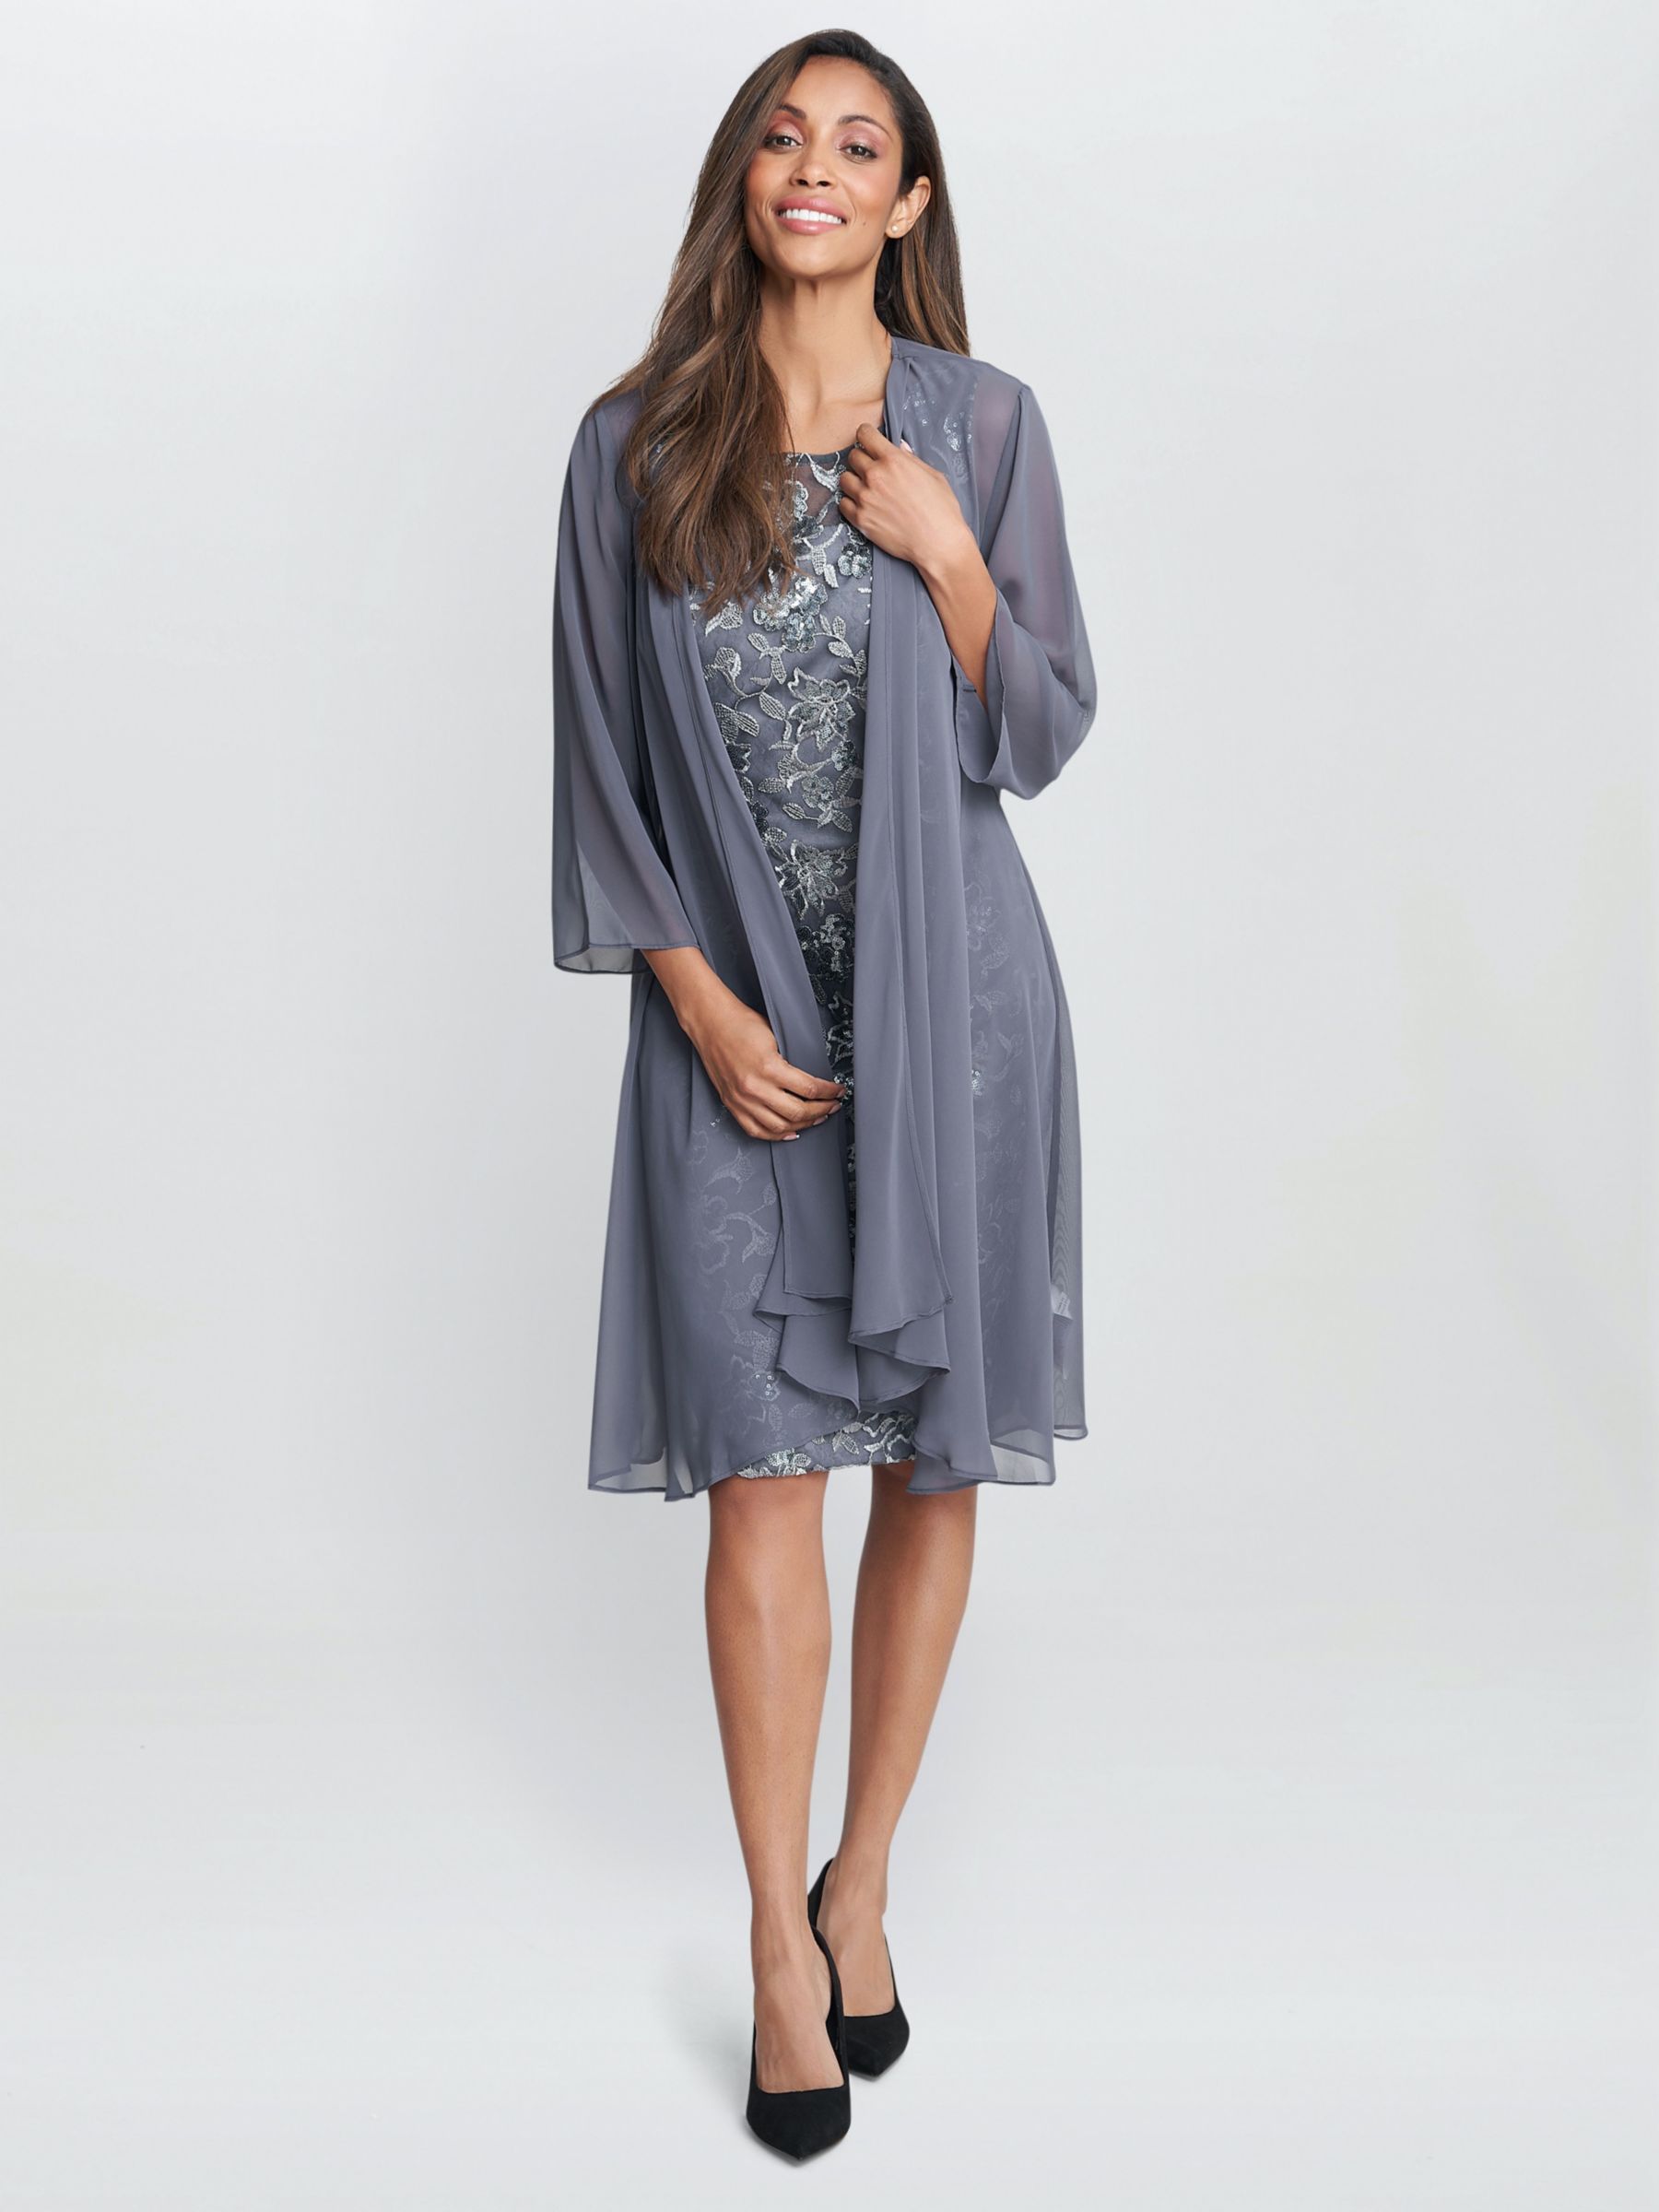 Buy Gina Bacconi Gladys Embroidered Dress with Chiffon Jacket, Pewter Online at johnlewis.com